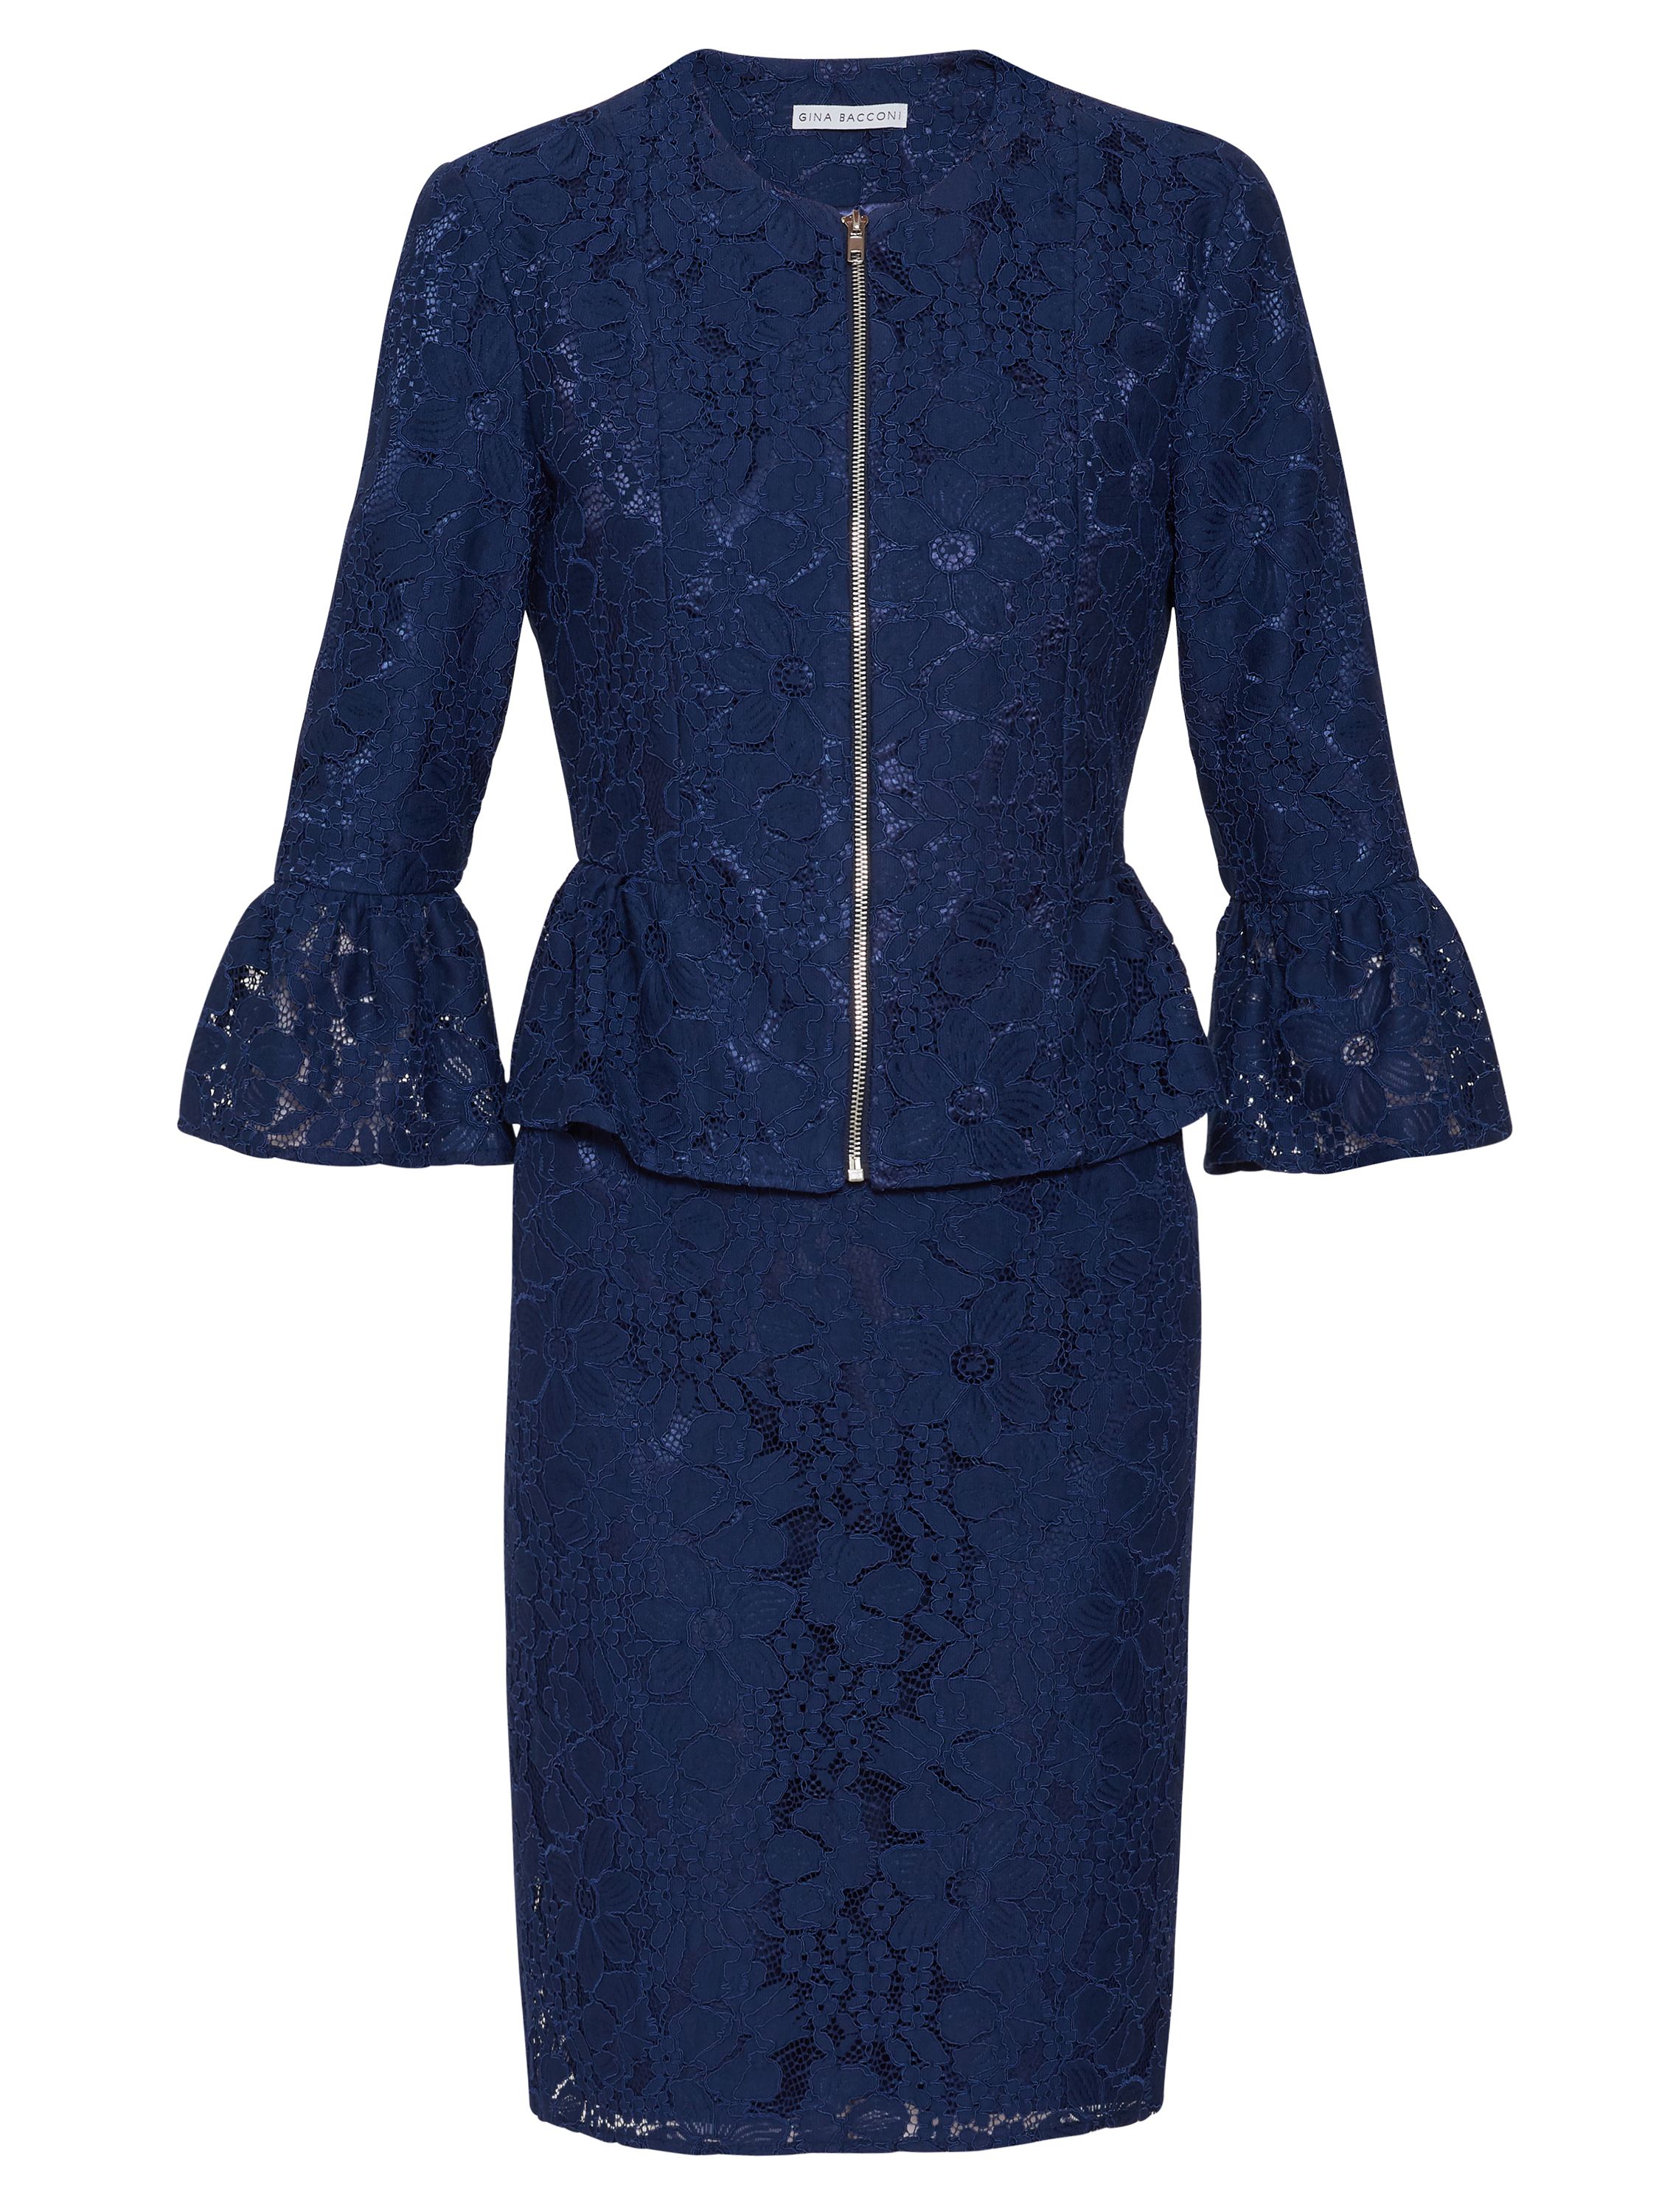 Gina Bacconi presents its smart lace dress and jacket combination. Both pieces in the set are fashioned from a gorgeous floral corded lace. The dress is well fitted and features a scoop neckline and back, while the jacket takes a flared sleeve and peplum waist for a classy touch. The dress is fastened using an invisible back zip and the jacket features a zip at the front. For added comfort the dress is lined with a soft jersey fabric.